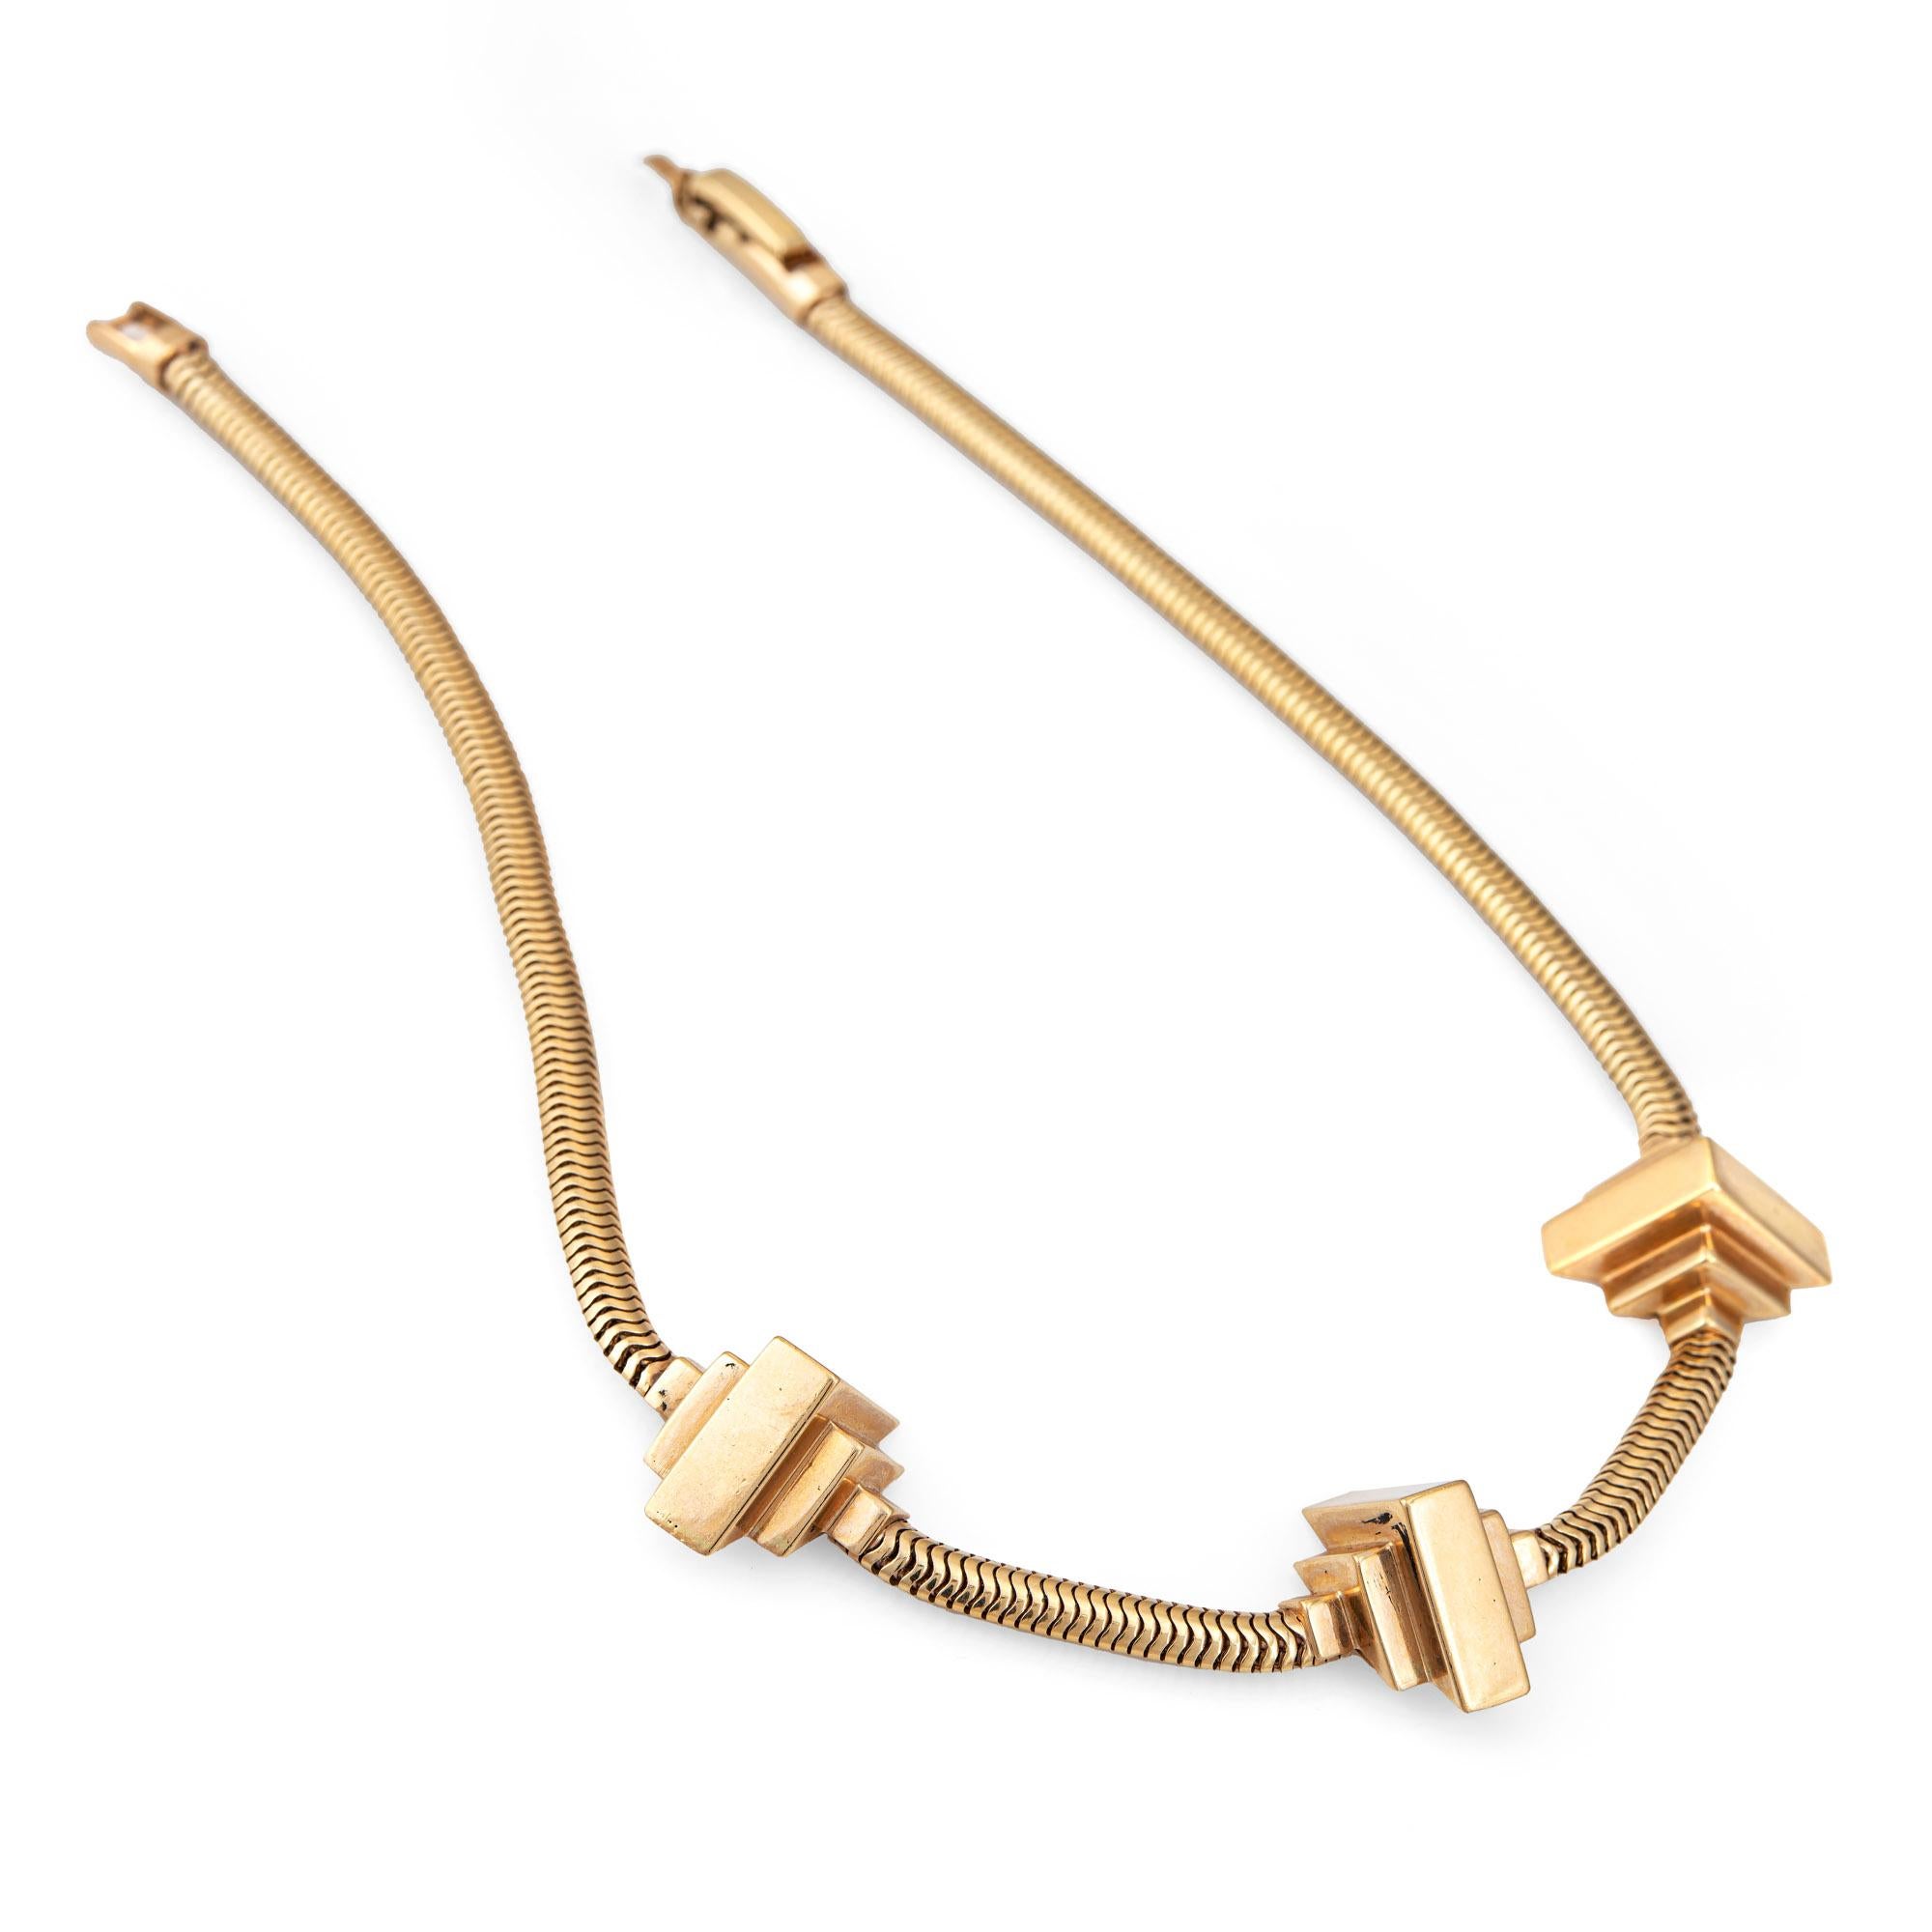 Stylish and finely detailed retro vintage snake chain necklace crafted in 14 karat yellow gold (circa 1940s).  

Three architectural style 'stations' offer a bold look to this stunning retro necklace. The snake chain is soft to the touch and moves